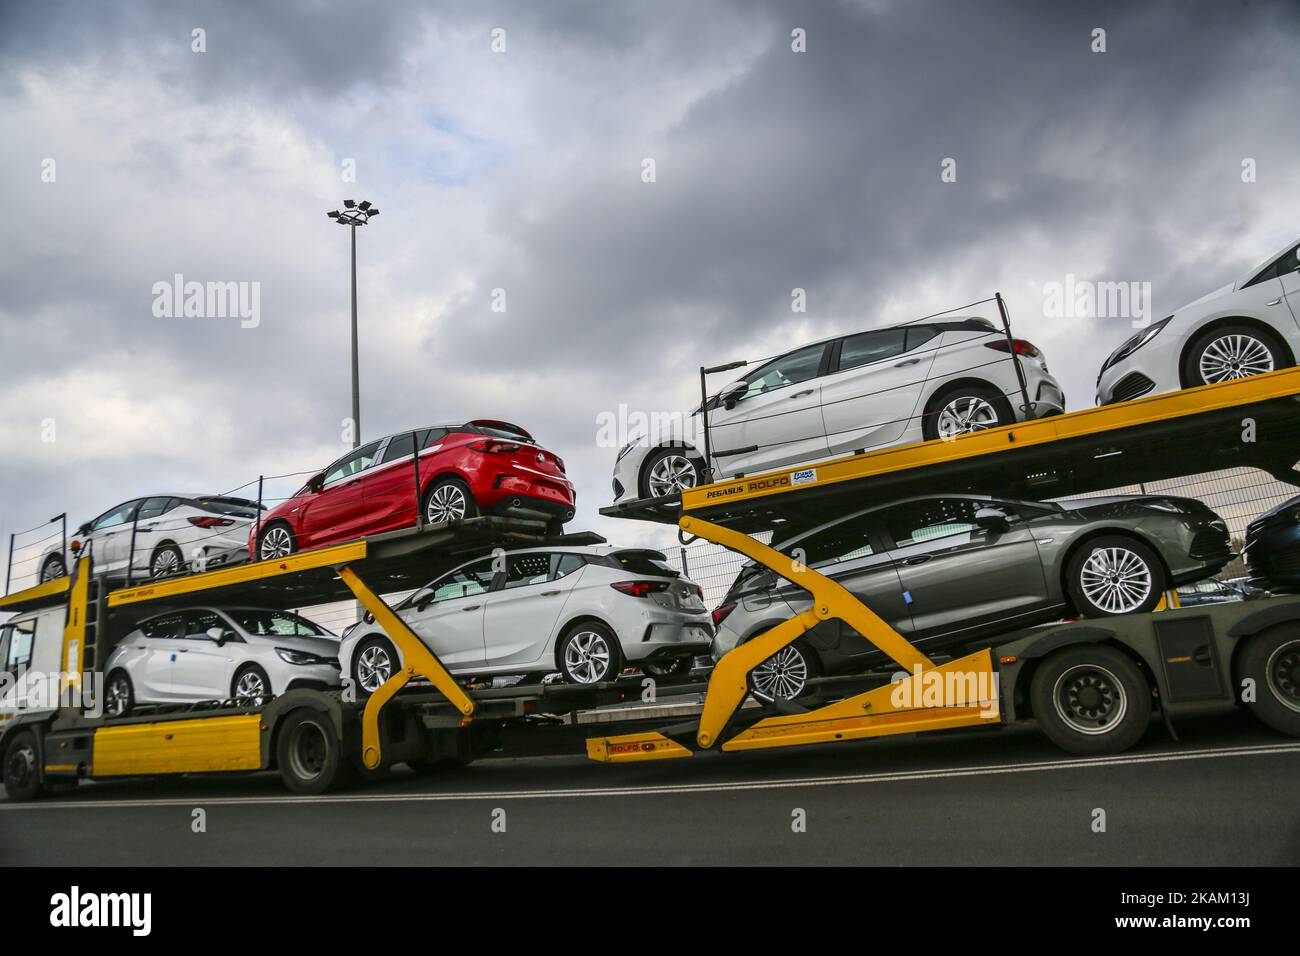 A brand new Opel Astra vehicles are transported by a car carrier trailer as they leave the Opel car factory of General Motors Manufacturing Poland in Gliwice, Poland, on March 7, 2017. General Motors is selling its loss-making European car business, including Germany's Opel and British brand Vauxhall, to France's PSA group. (Photo by Beata Zawrzel/NurPhoto) *** Please Use Credit from Credit Field *** Stock Photo